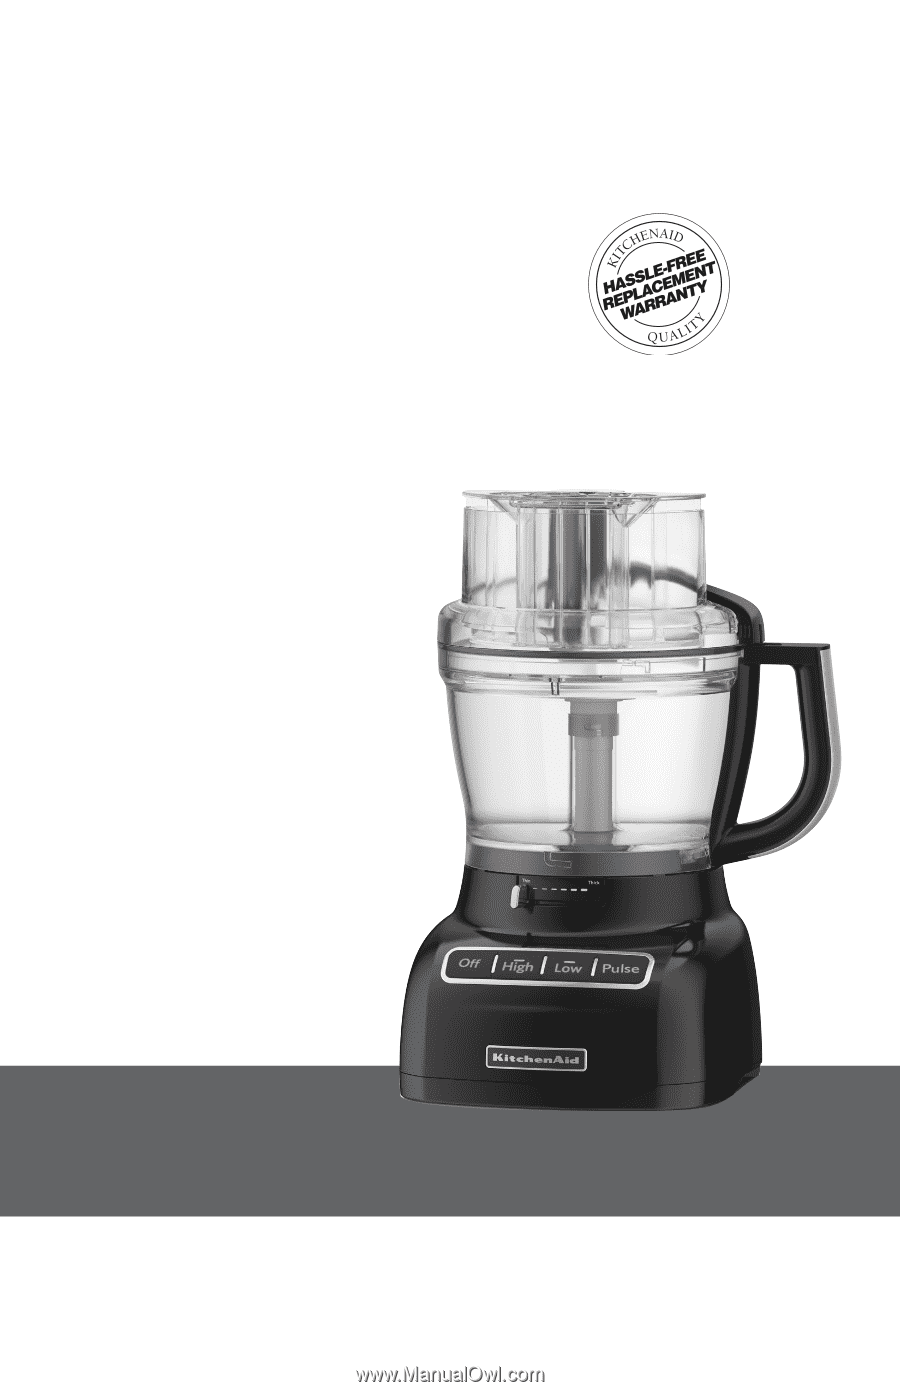 https://www.manualowl.com/manual_guide/products/kitchenaid-kfp1333cu-use-care-guide-69ec44b/2.png